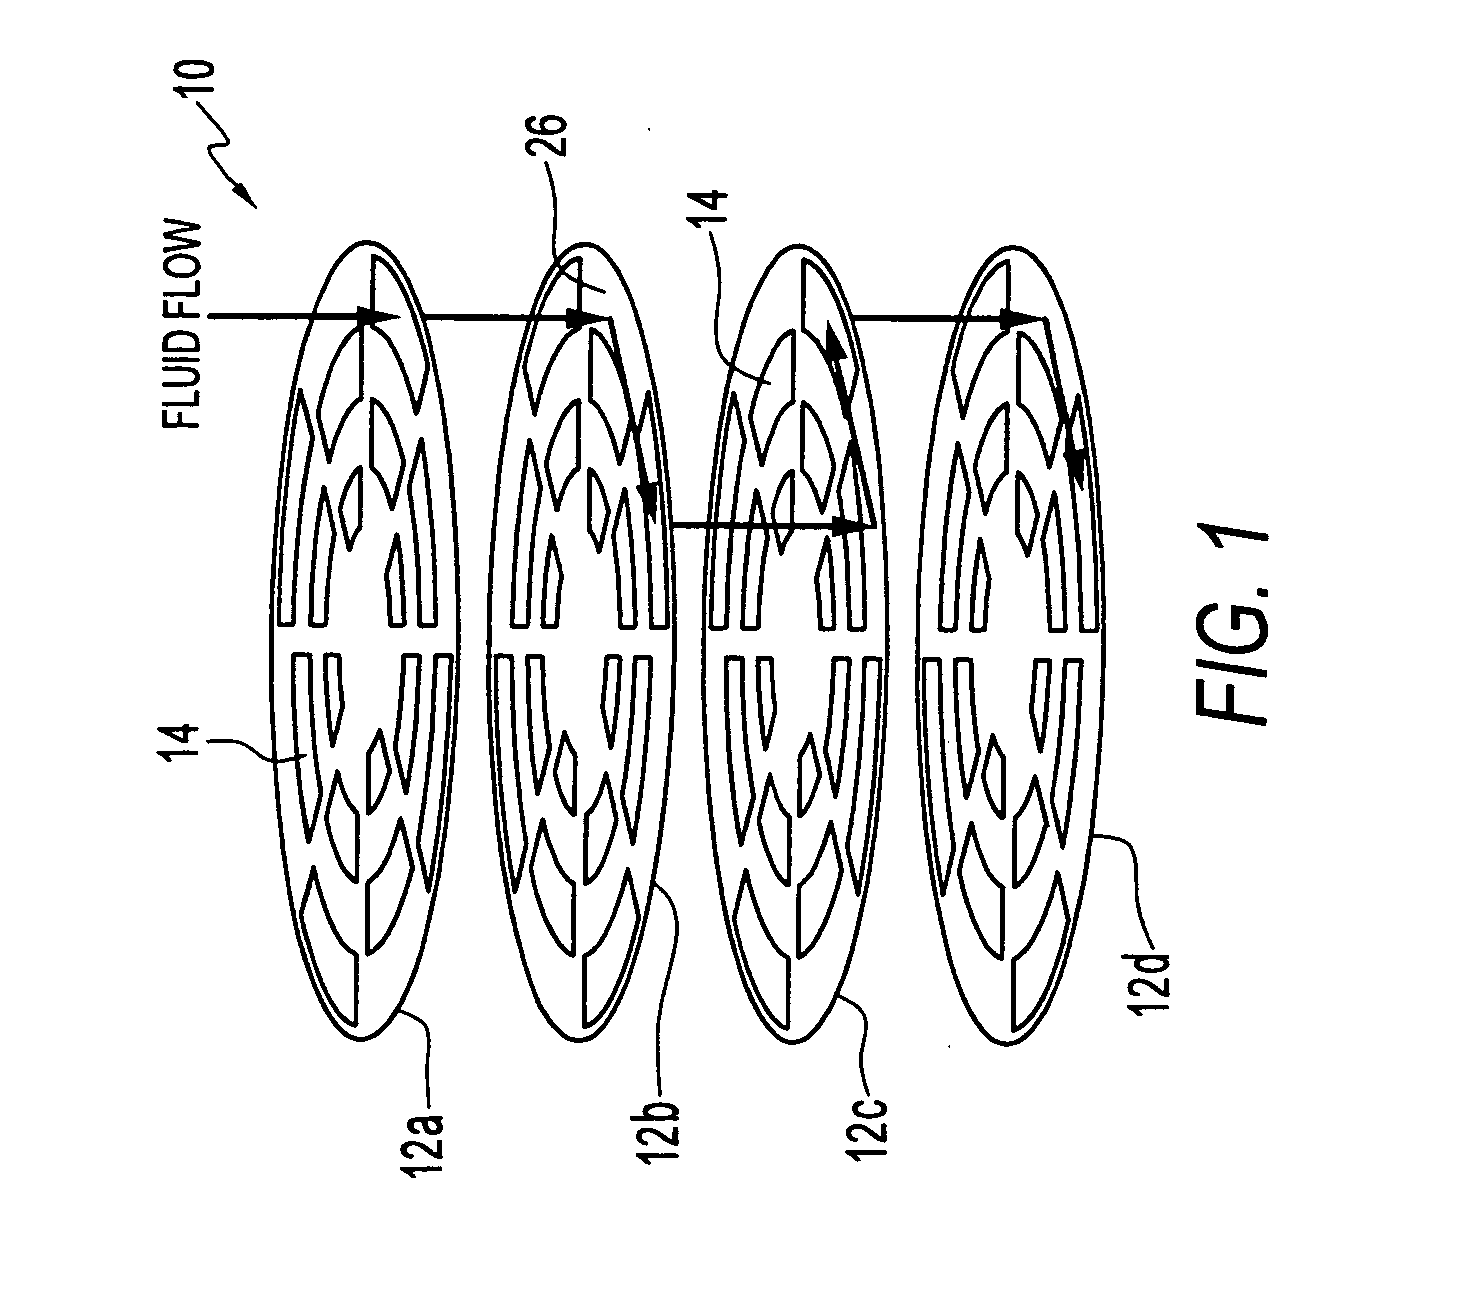 Micro scale flow through sorbent plate collection device